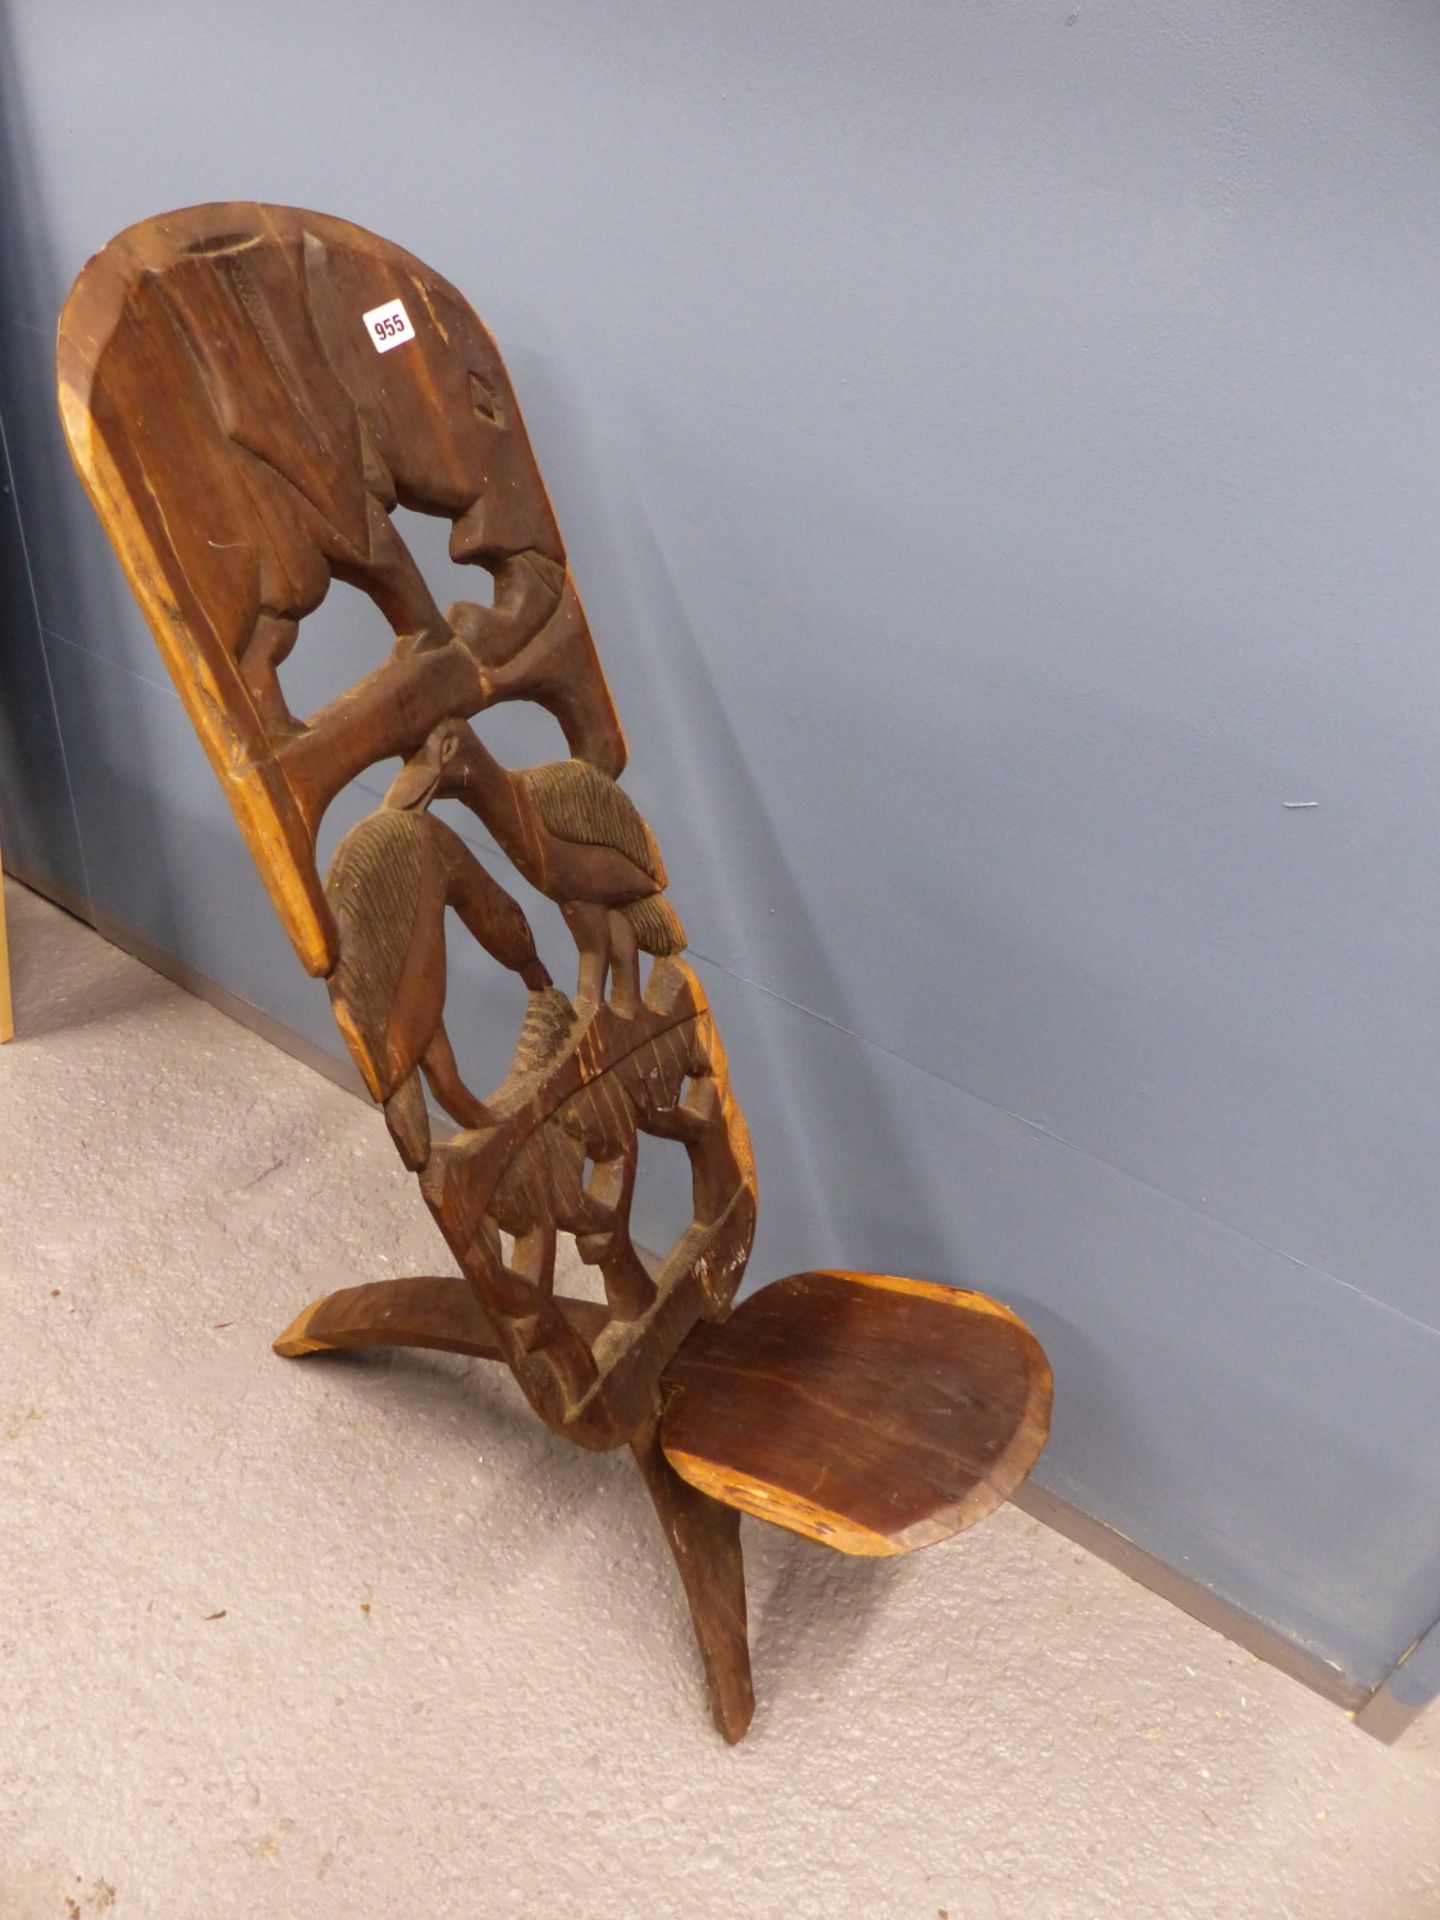 AN AFRICAN CARVED HARDWOOD "BIRTHING" CHAIR. - Image 2 of 3